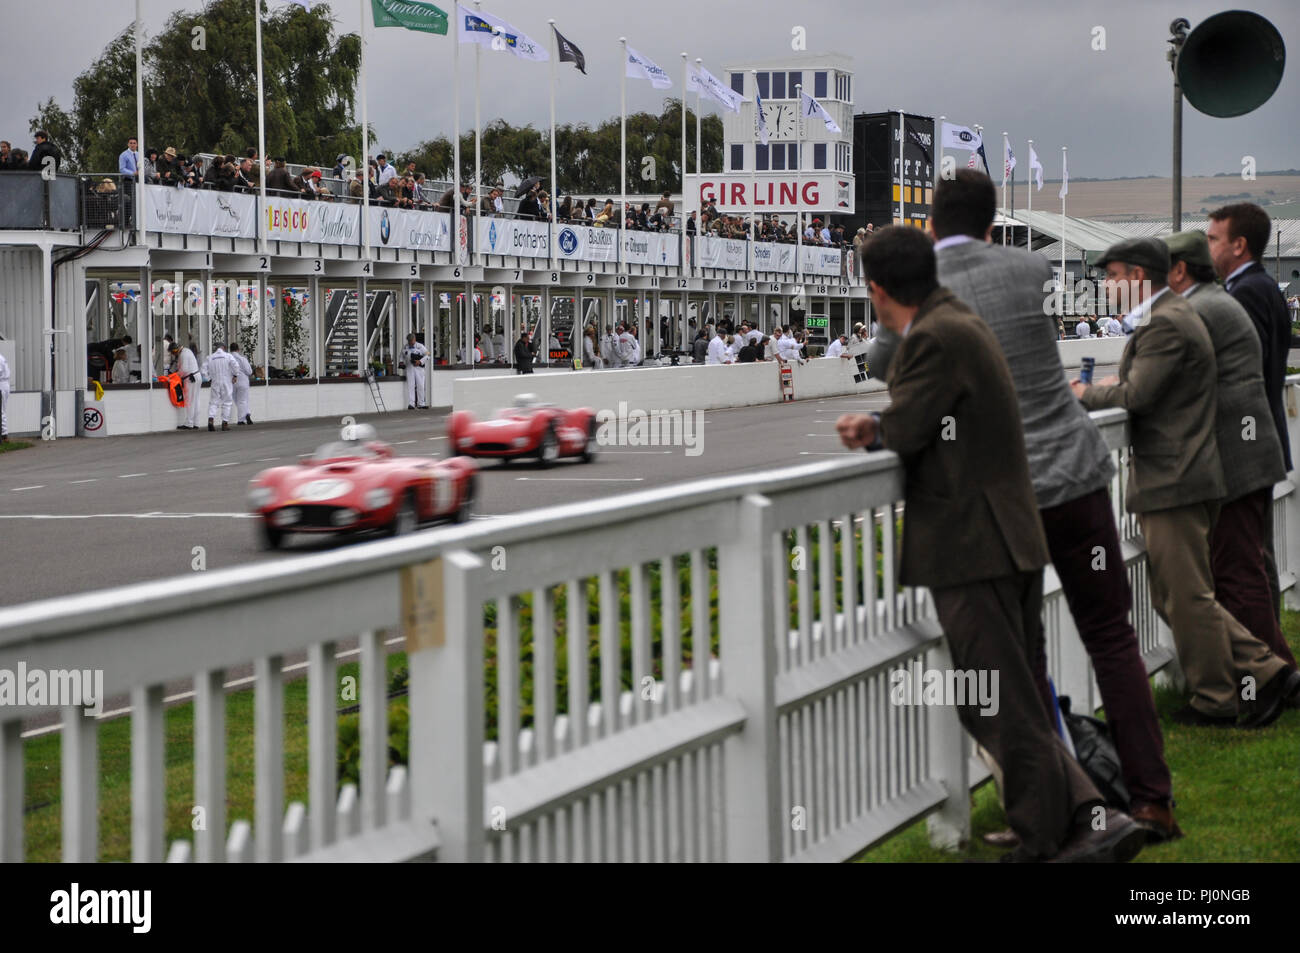 The Goodwood Revival The Freddie March Memorial Trophy race, endurance evening race, with people in period costume watching. Racing cars Stock Photo